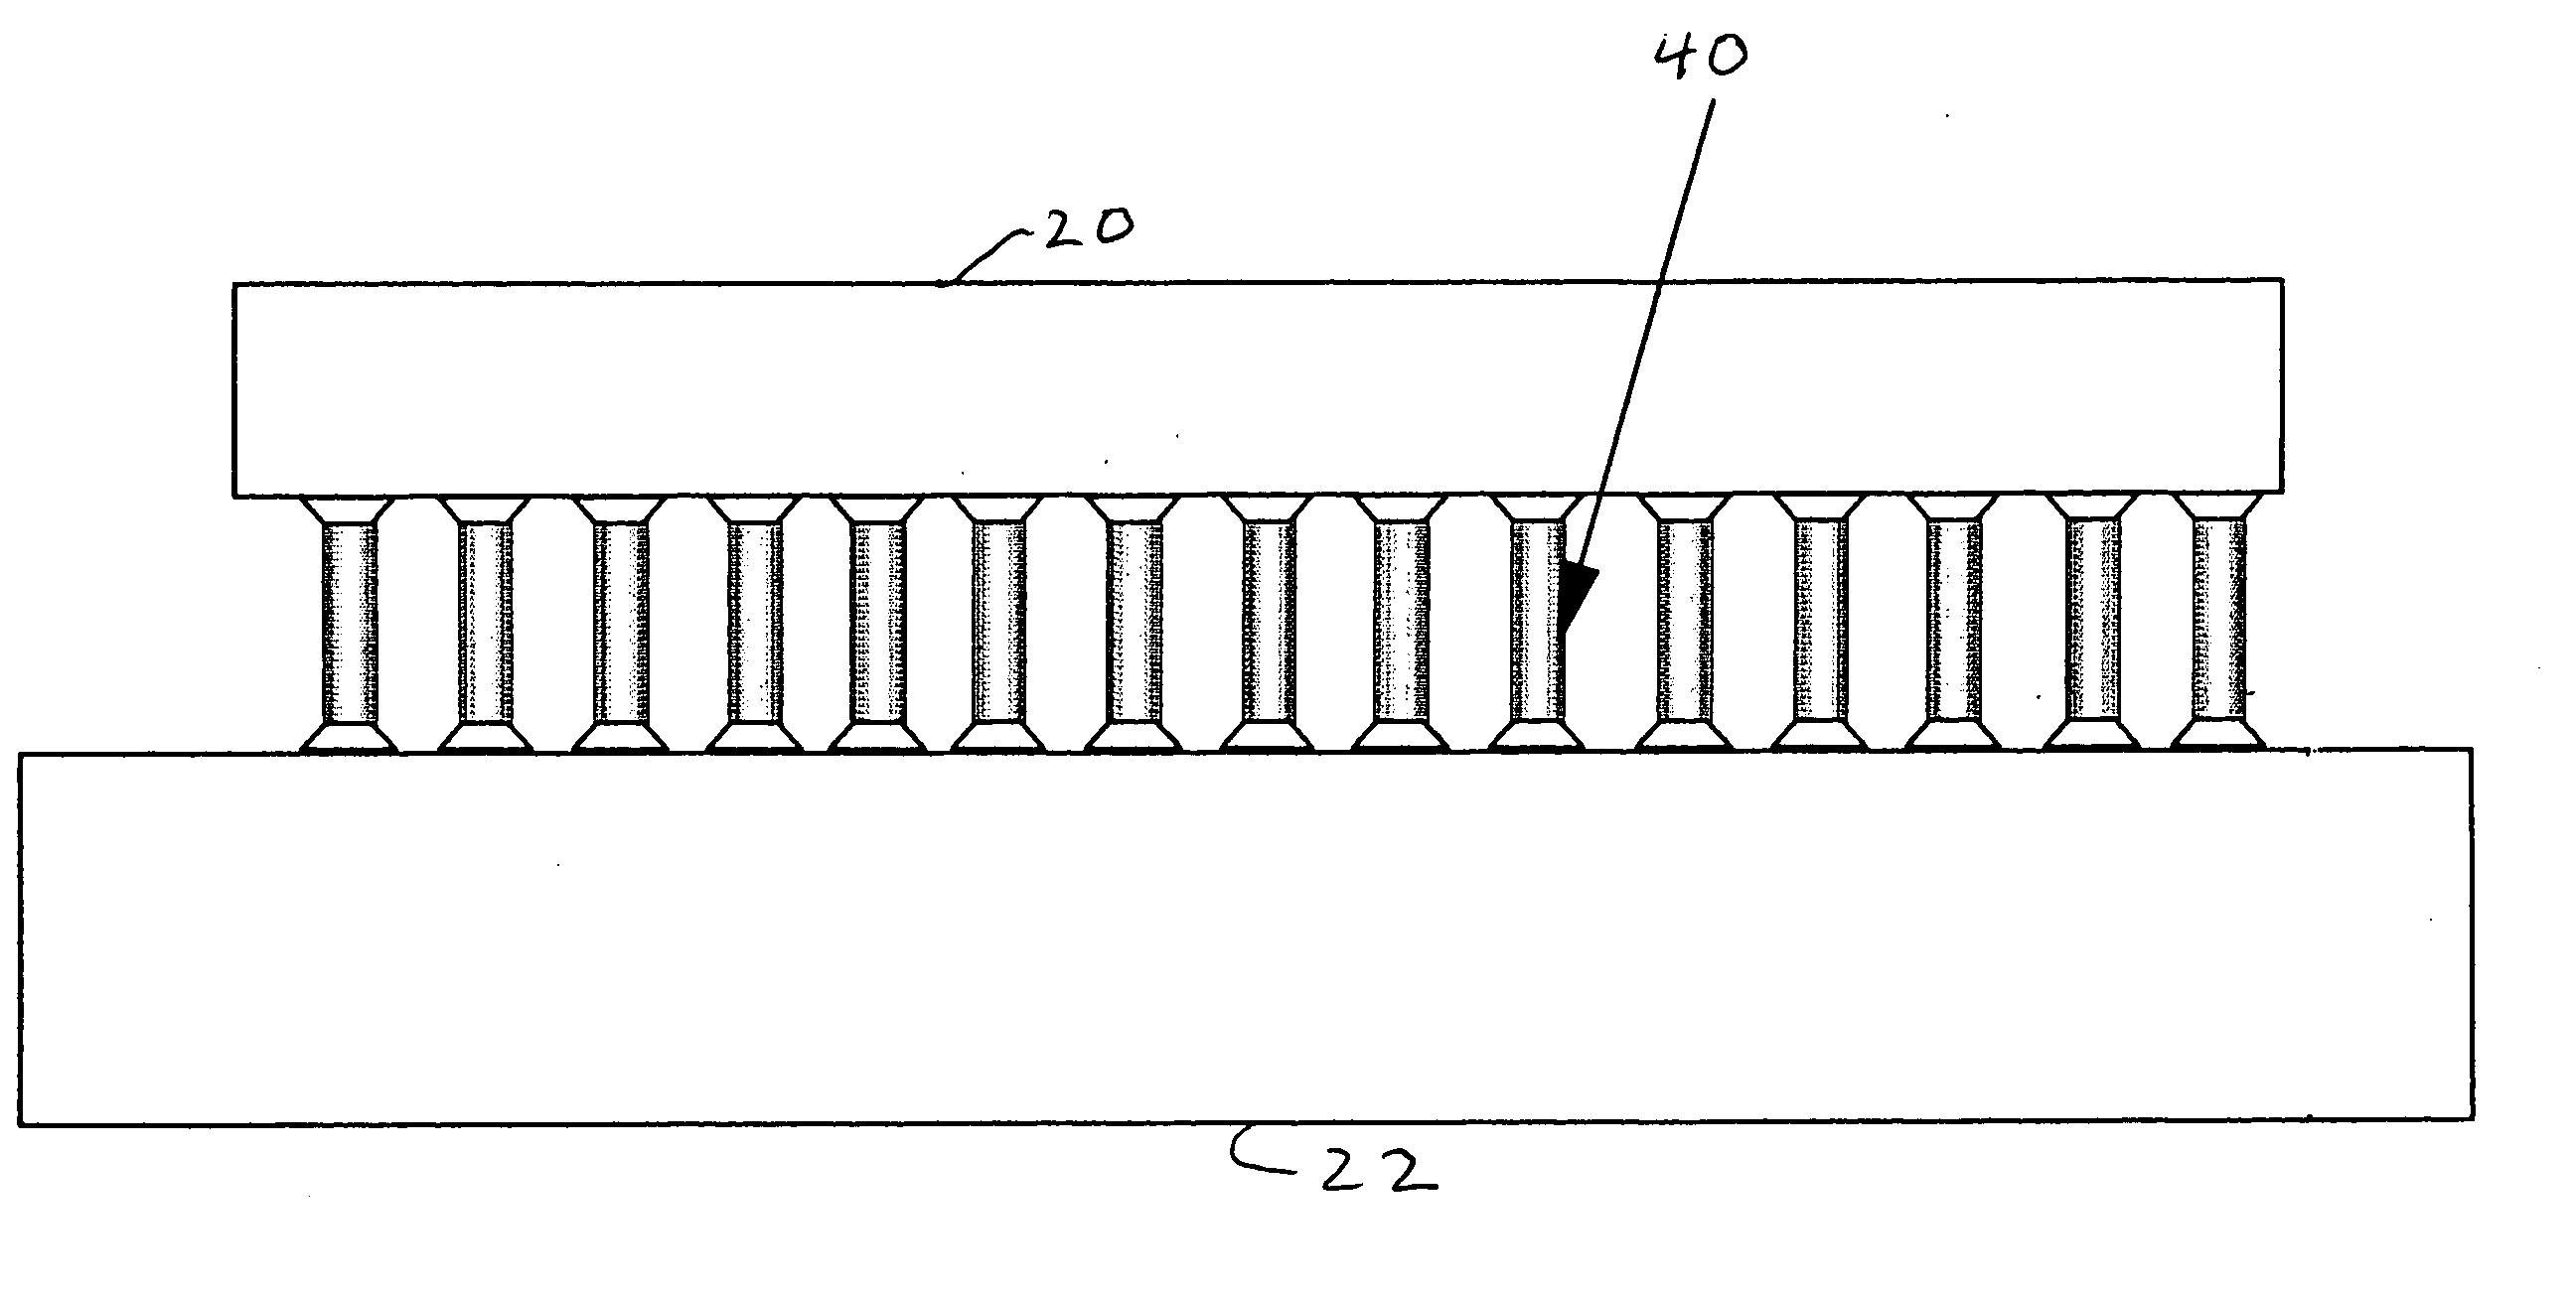 Solder interconnect structure and method using injection molded solder